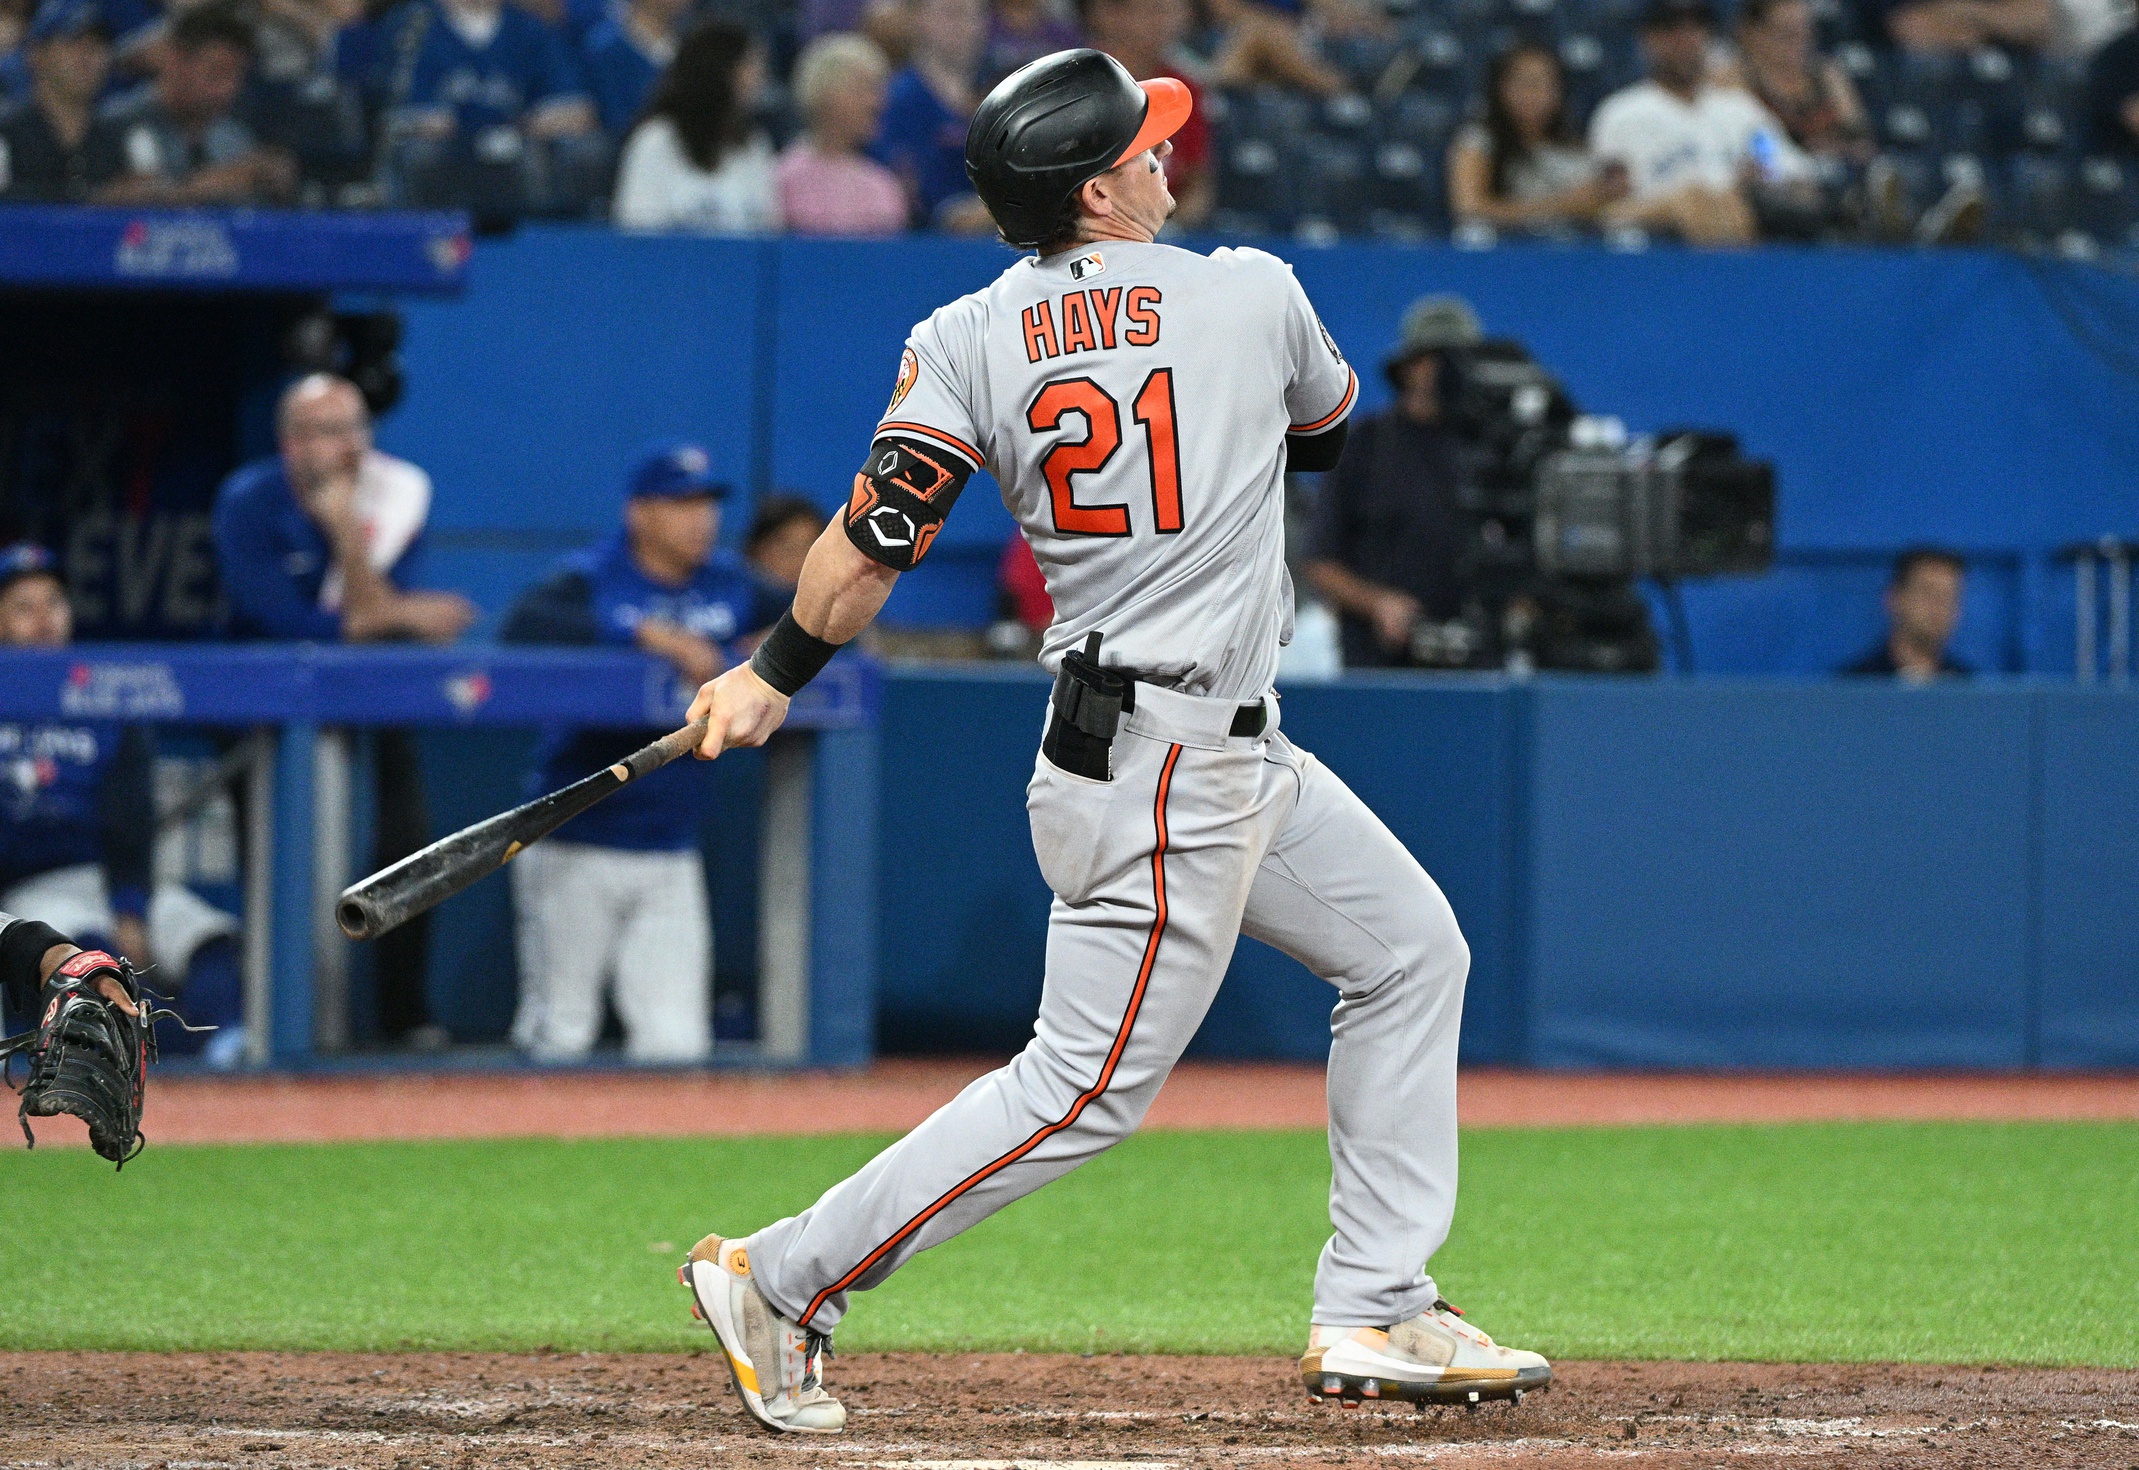 Peter Schmuck: Orioles are starting to draw attention for the right reasons - BaltimoreBaseball.com